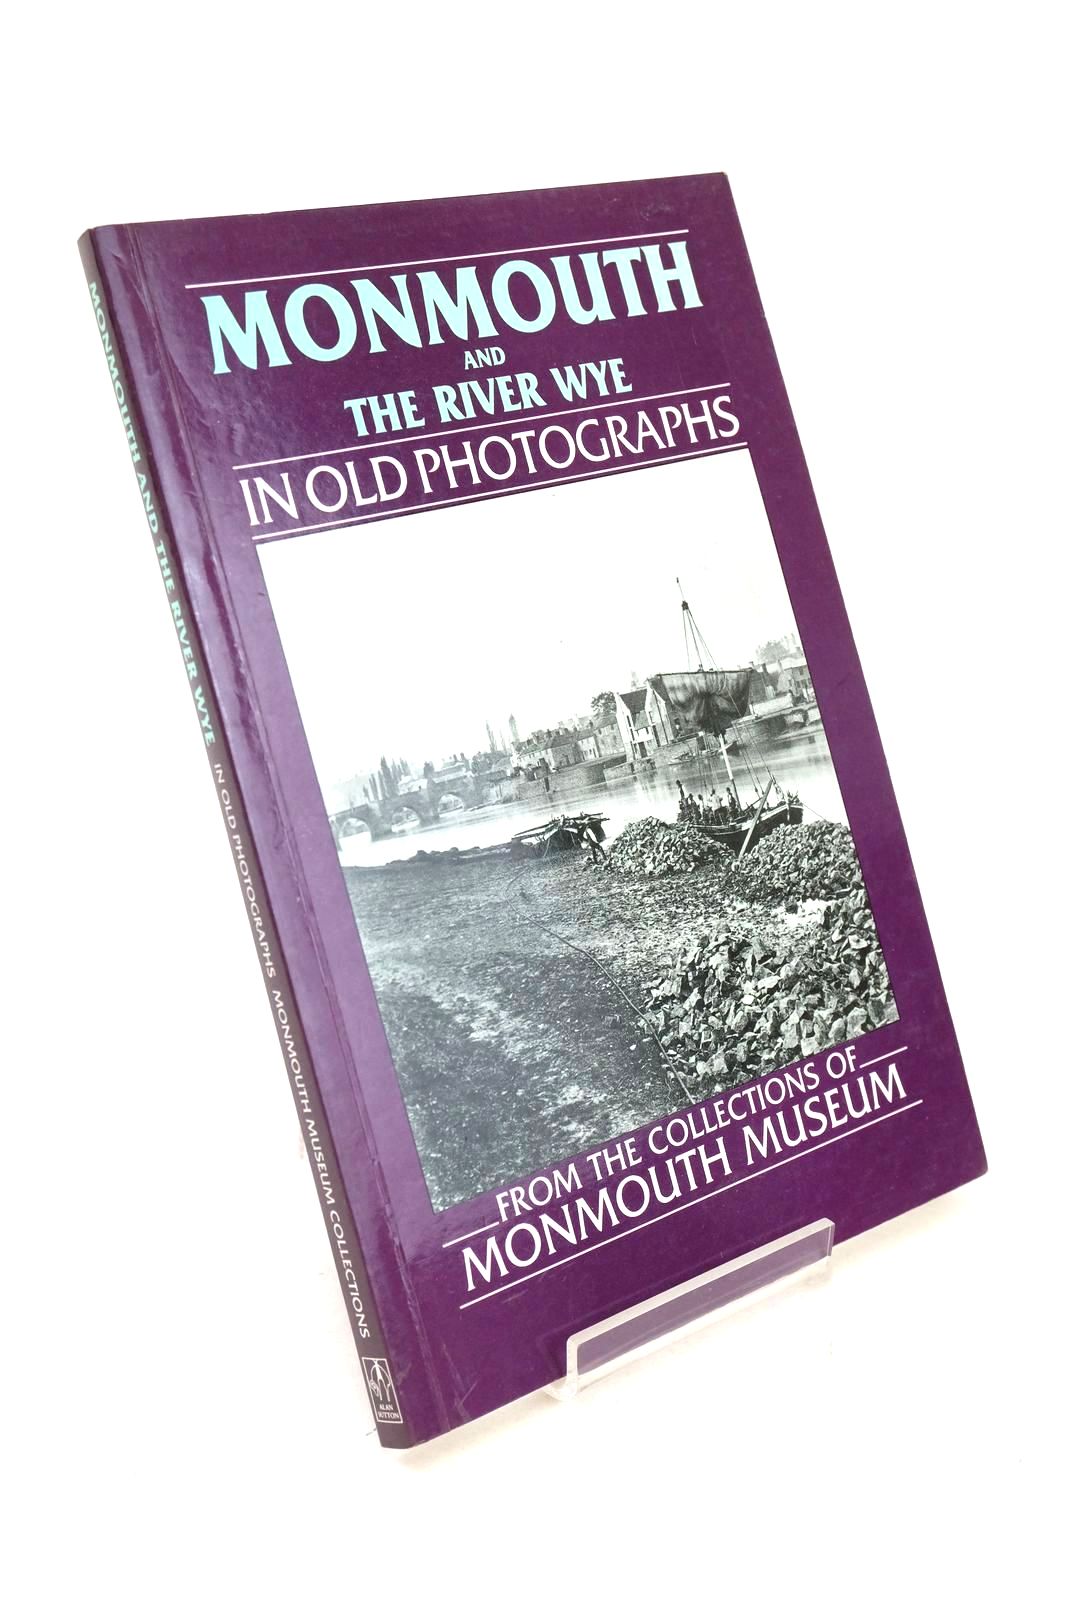 Photo of MONMOUTH AND THE RIVER WYE IN OLD PHOTOGRAPHS written by Helme, Andrew published by Alan Sutton (STOCK CODE: 1327154)  for sale by Stella & Rose's Books